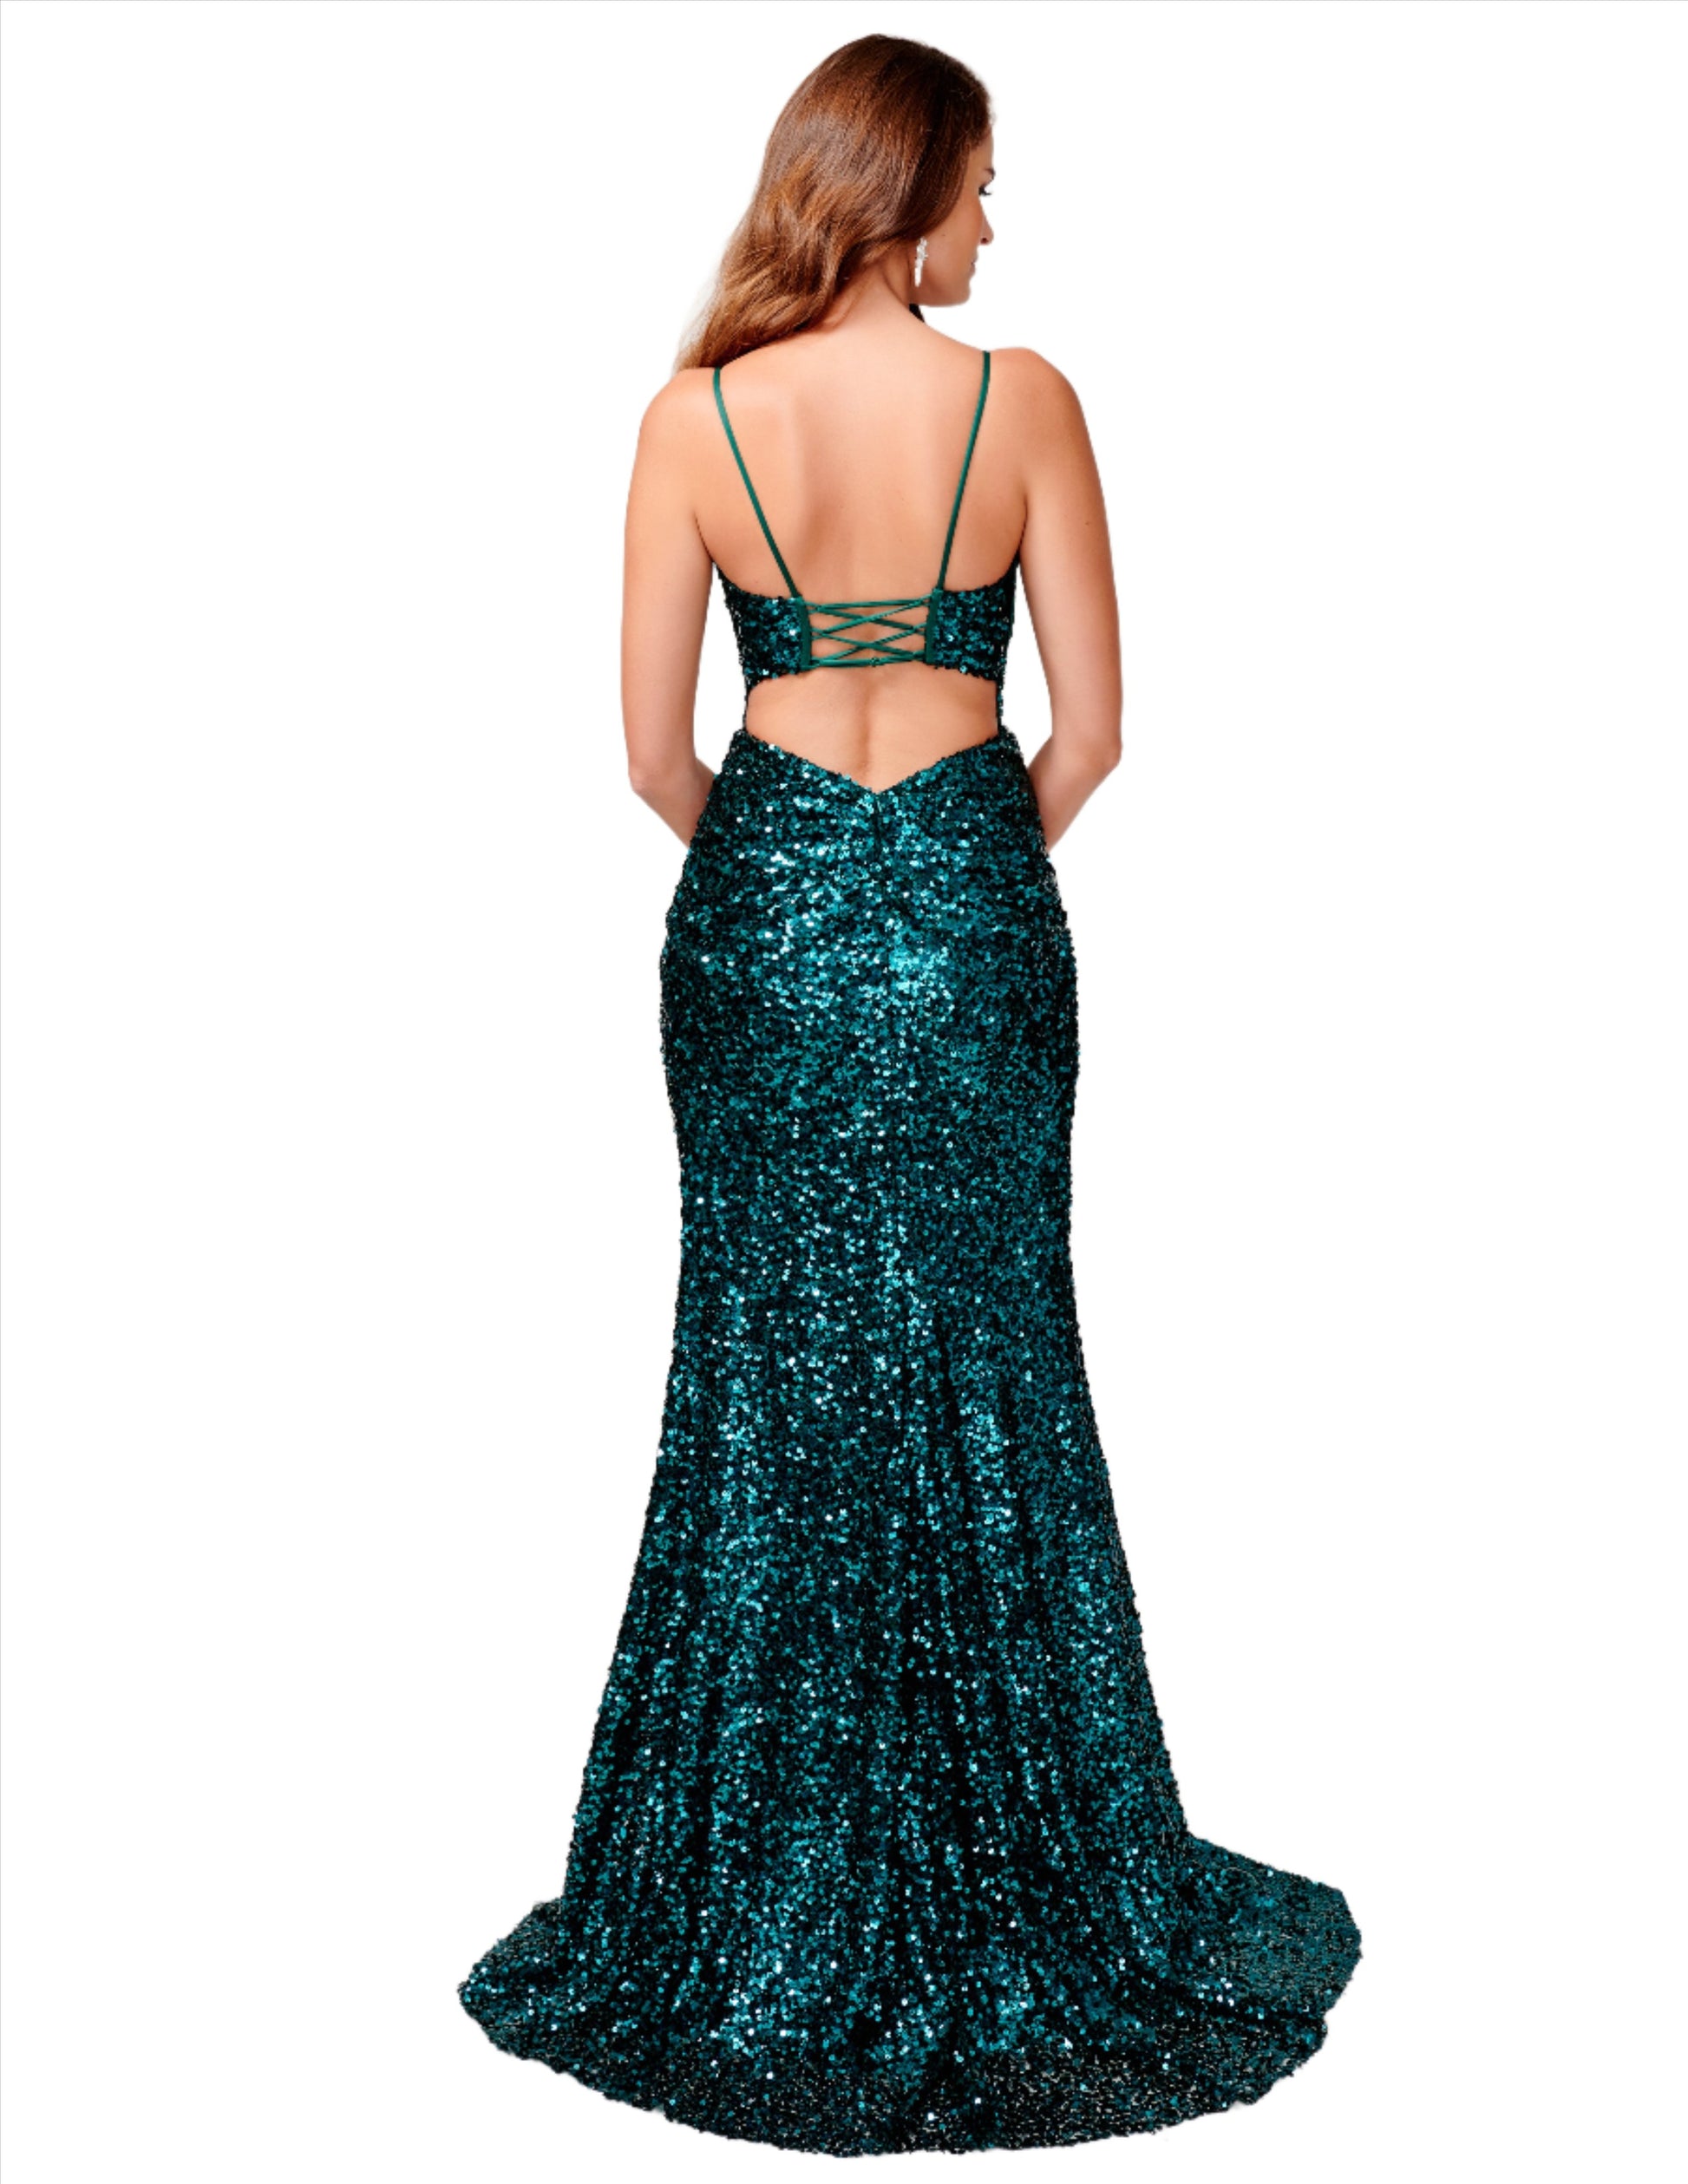 Nina Canacci 4406 Sequin Corset Prom Dress Backless Maxi Slit Formal Evening Gown